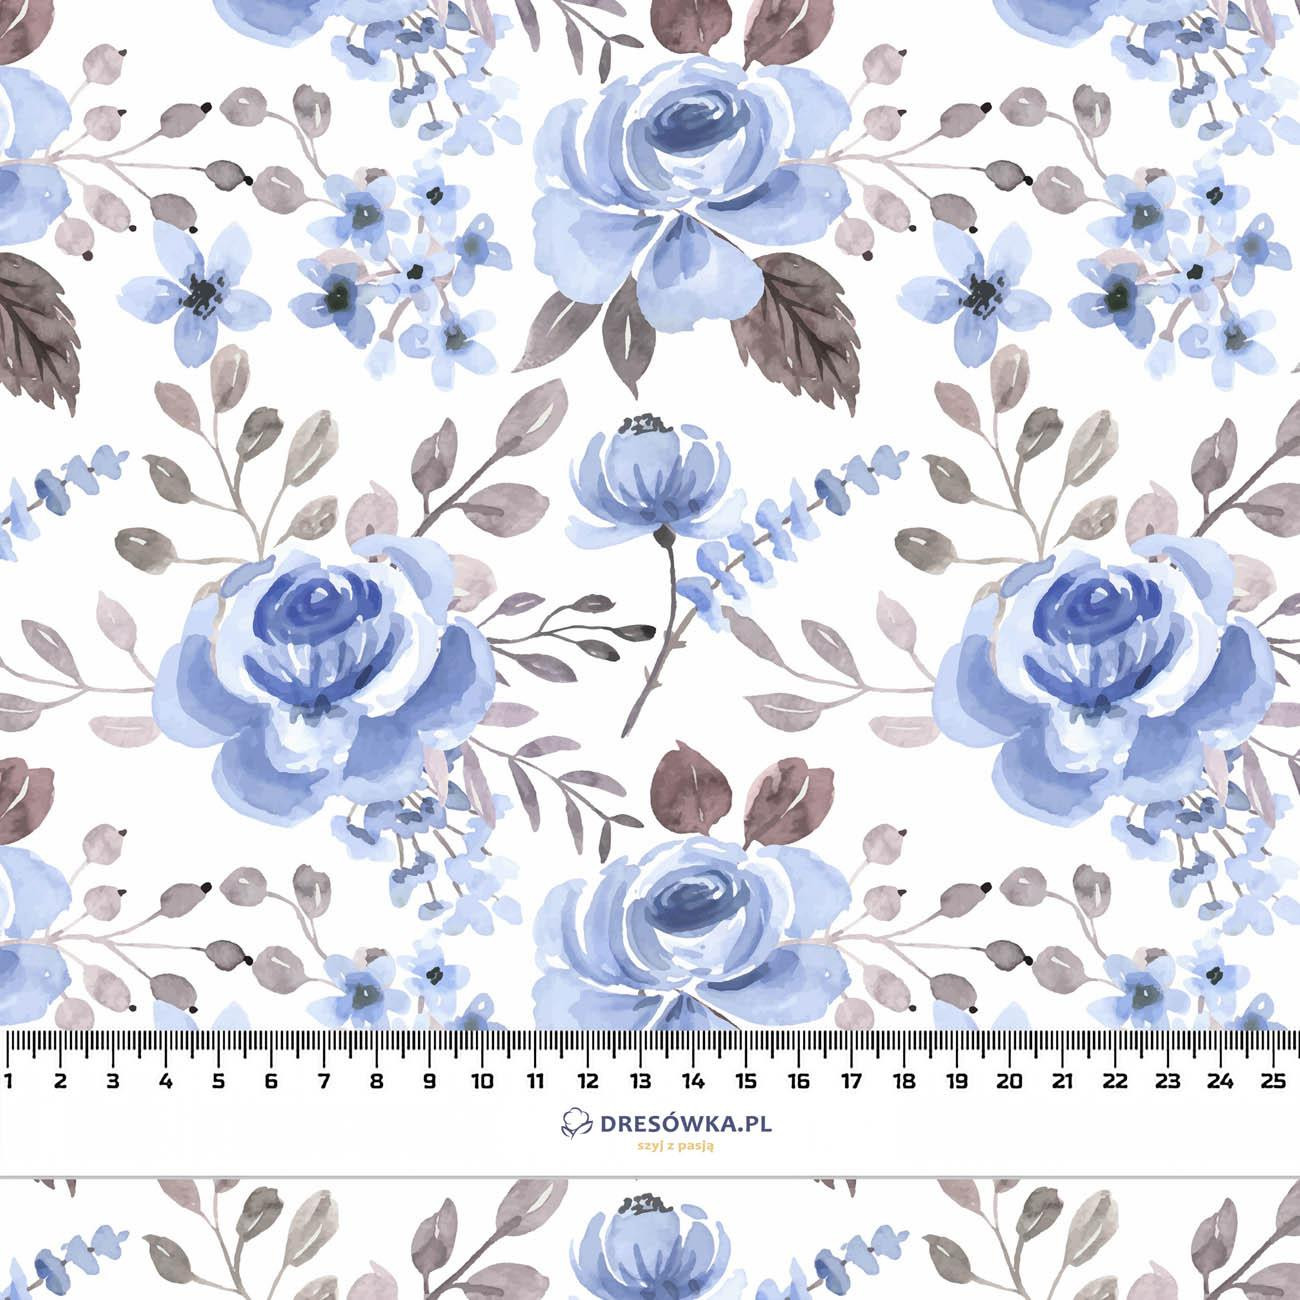 BLUE FLOWERS - brushed knit fabric with teddy / alpine fleece